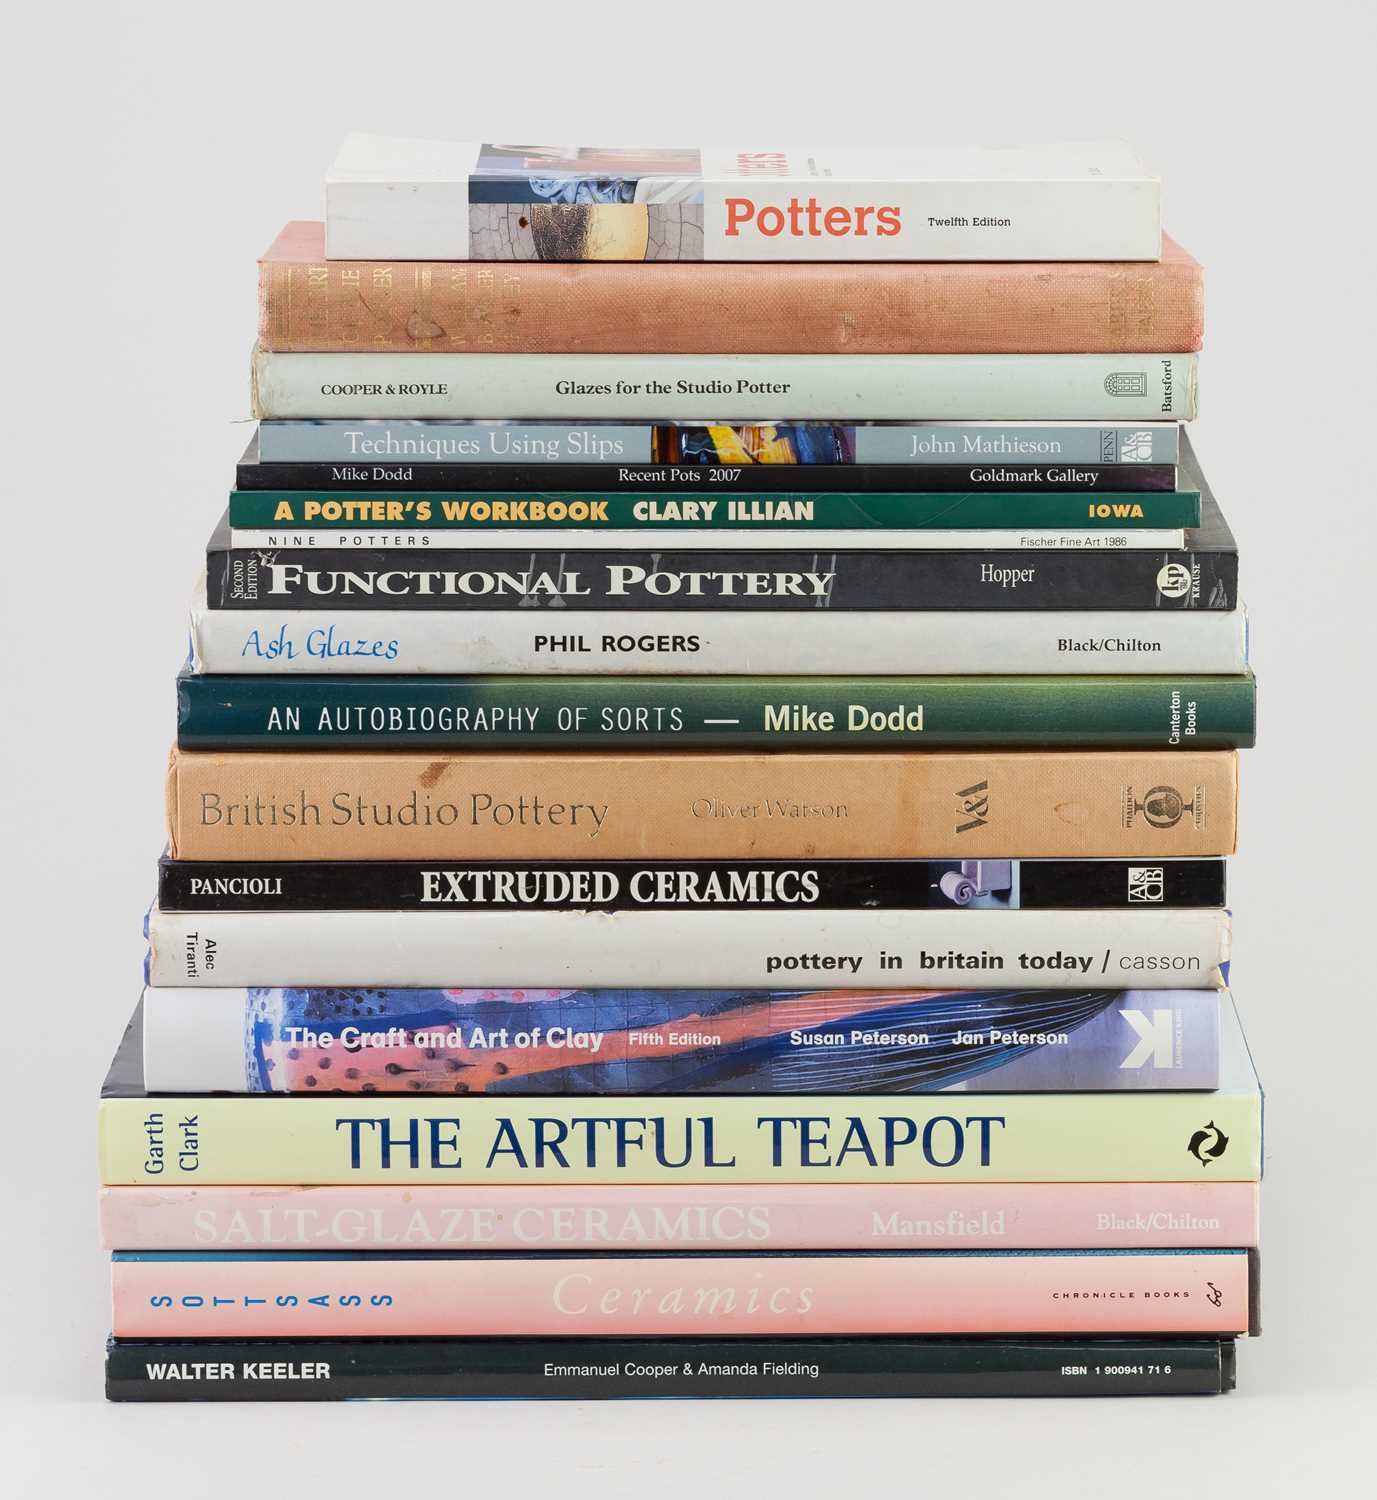 A collection of books on studio ceramics including monographs about Walter Keeler, Mike Dodd and